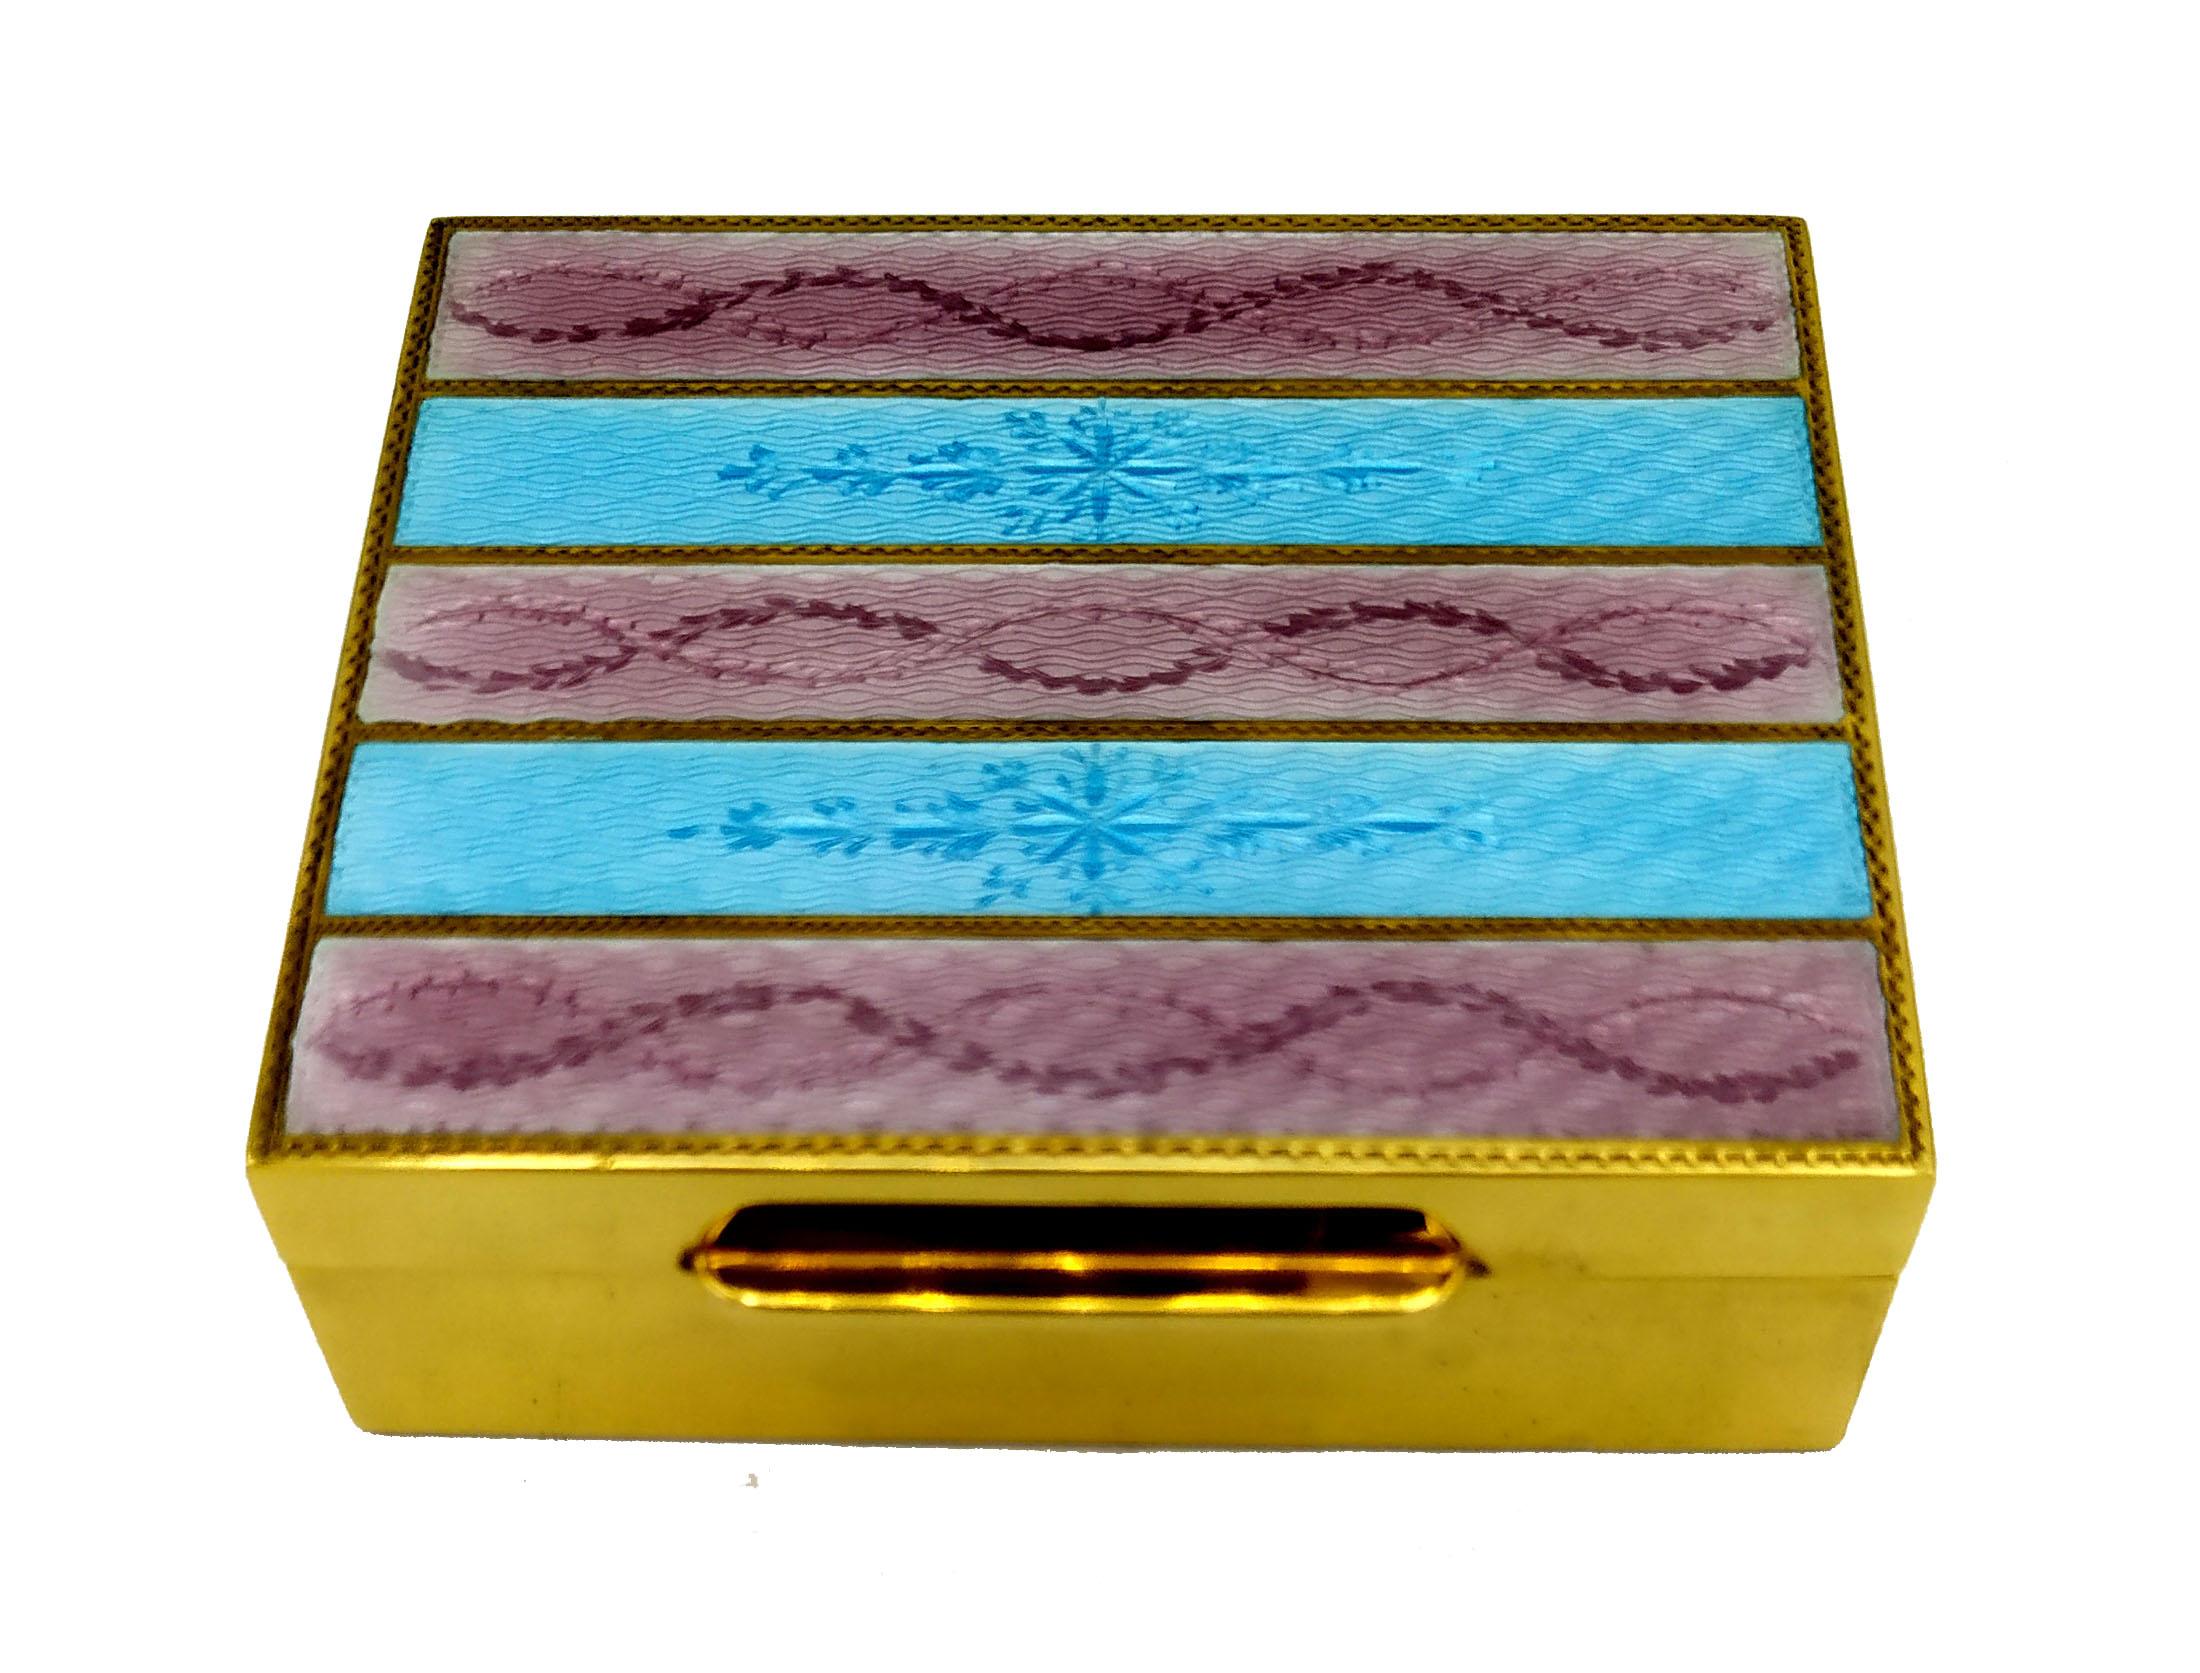 Rectangular table box in 925/1000 sterling silver gold plated with translucent two-tone striped fired enamel on guillochè and hand-engraved ornament. Late Empire Napoleon III style. Dimensions cm. 6.4 x 7.5 x 2.4. Weight gr. 219. Designed by Franco